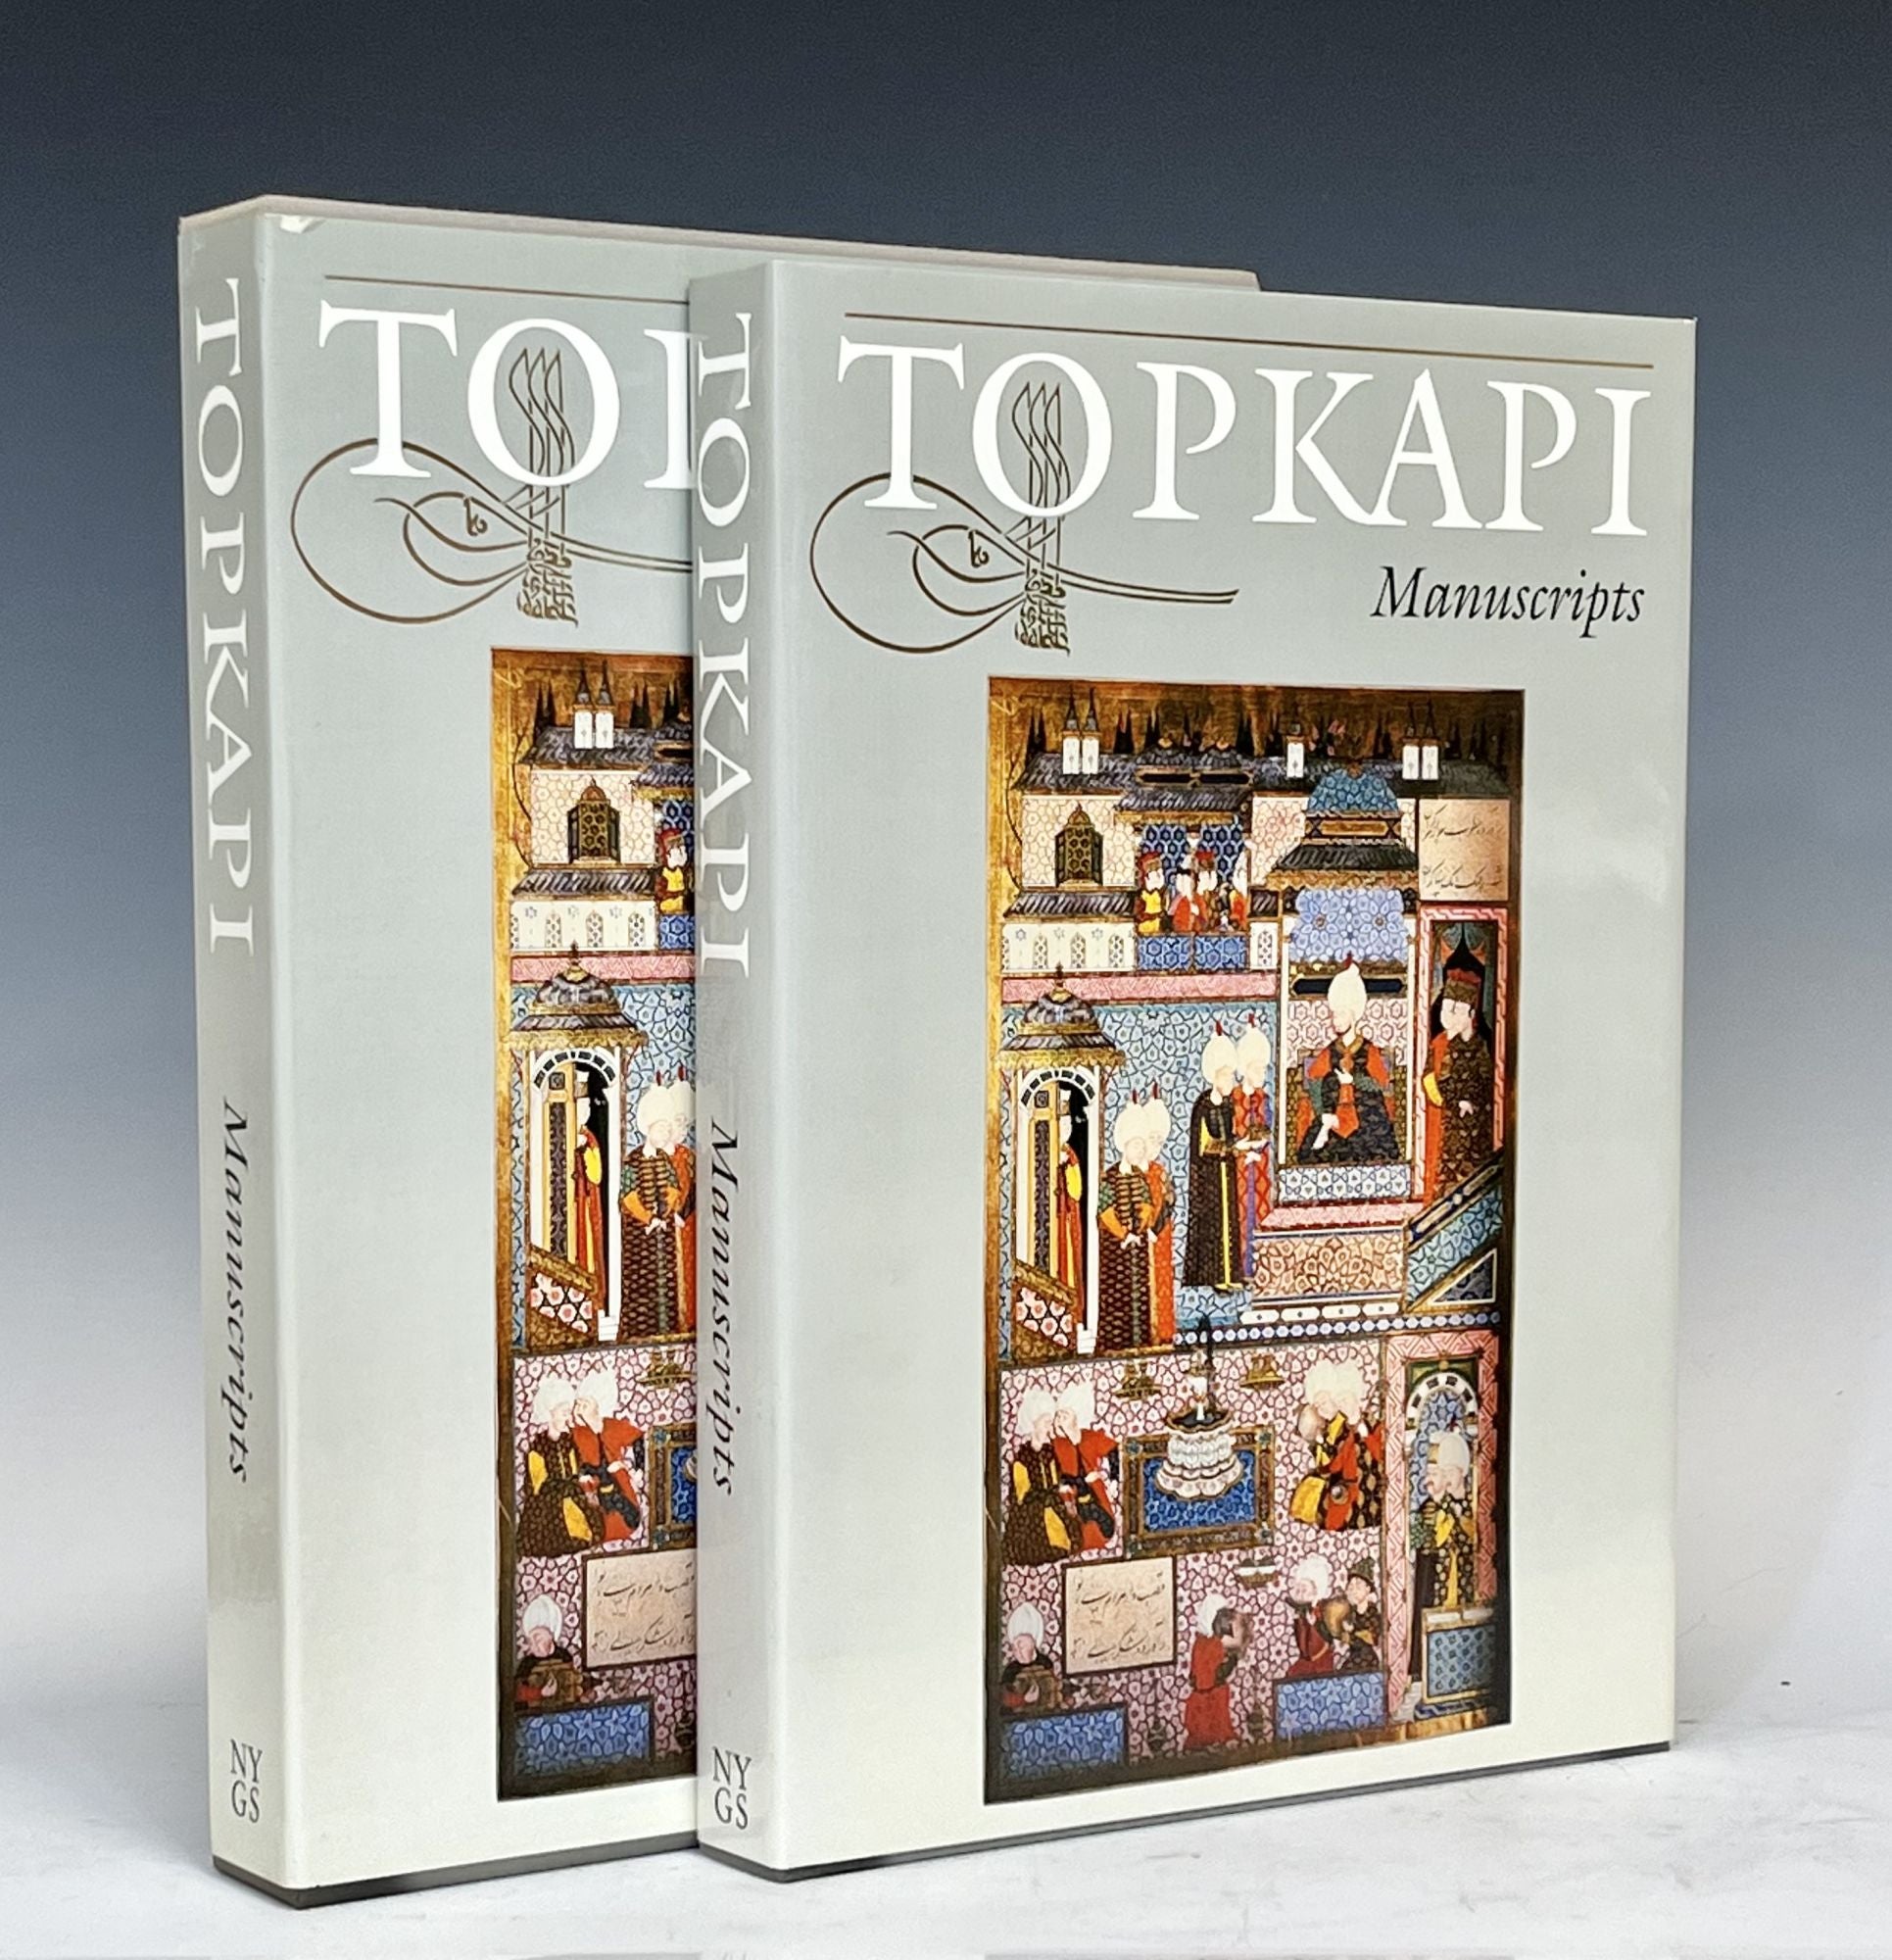 Topkapi Saray Museum. Complete in Five Volumes - Manuscripts, Textiles,  Carpets, The Treasury and Architecture on Vintage Books